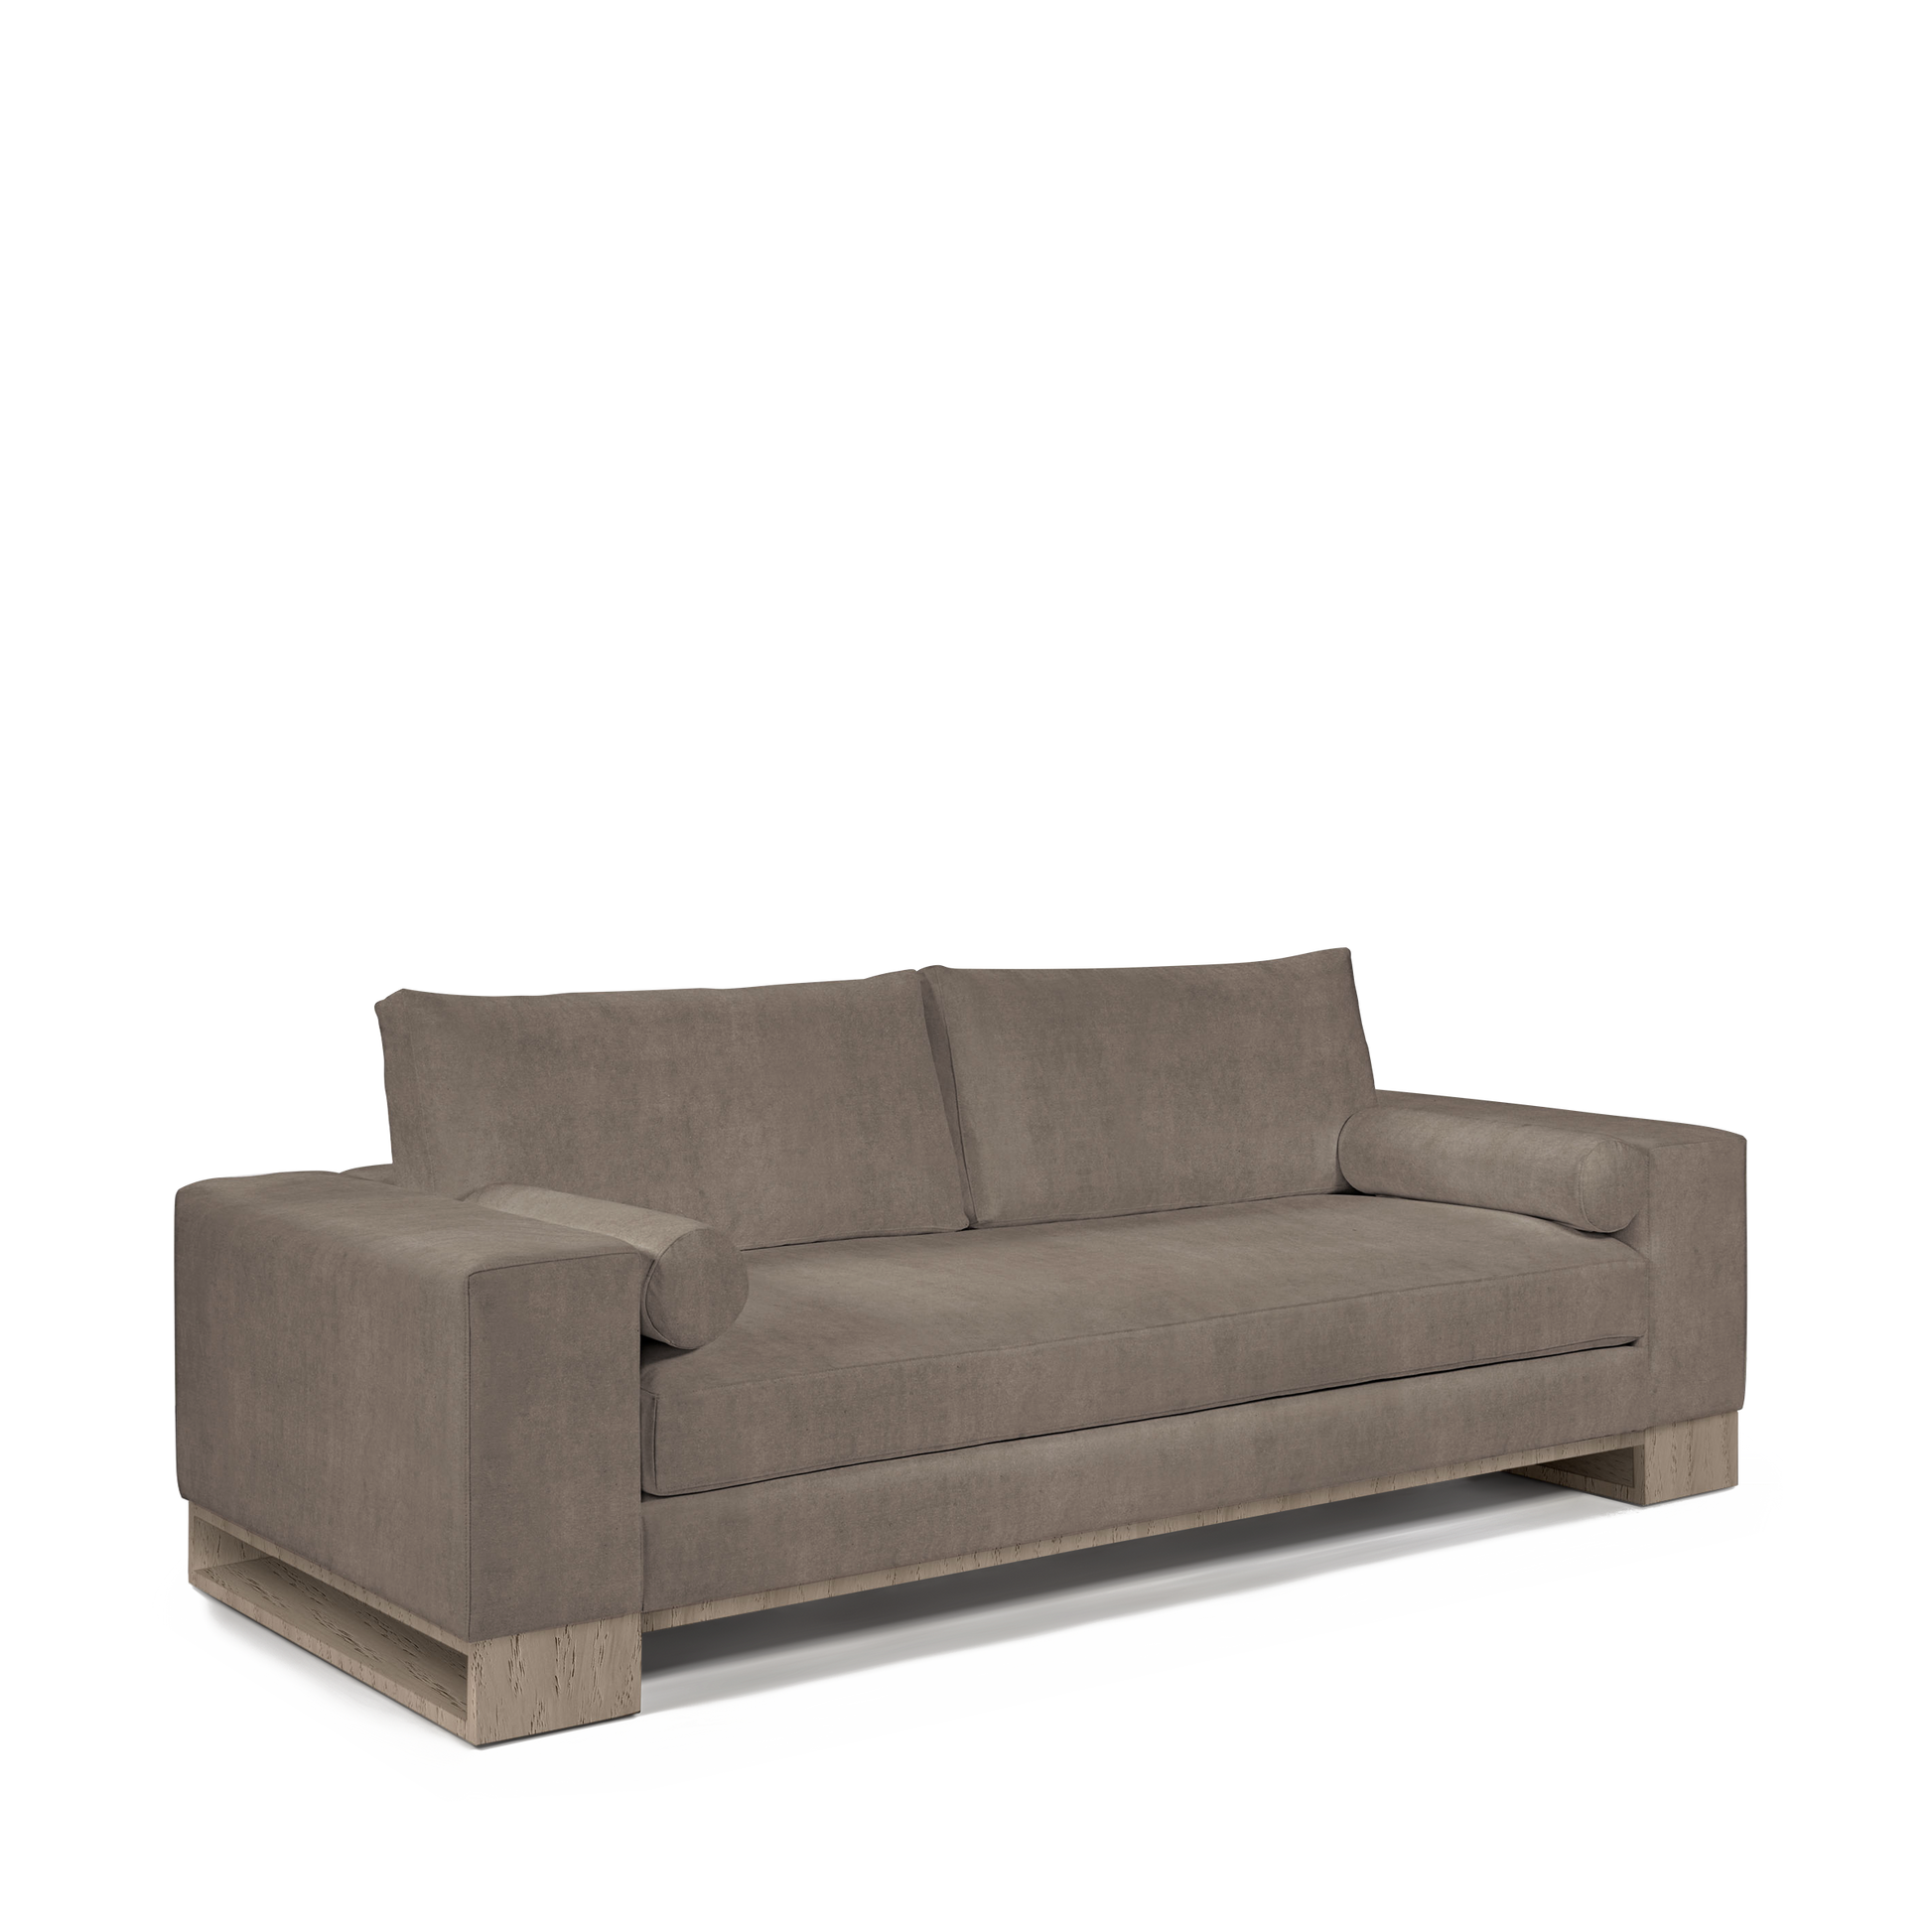 TERRA 2,5-seater sofa with suede grey textile and natural grey wood legs 